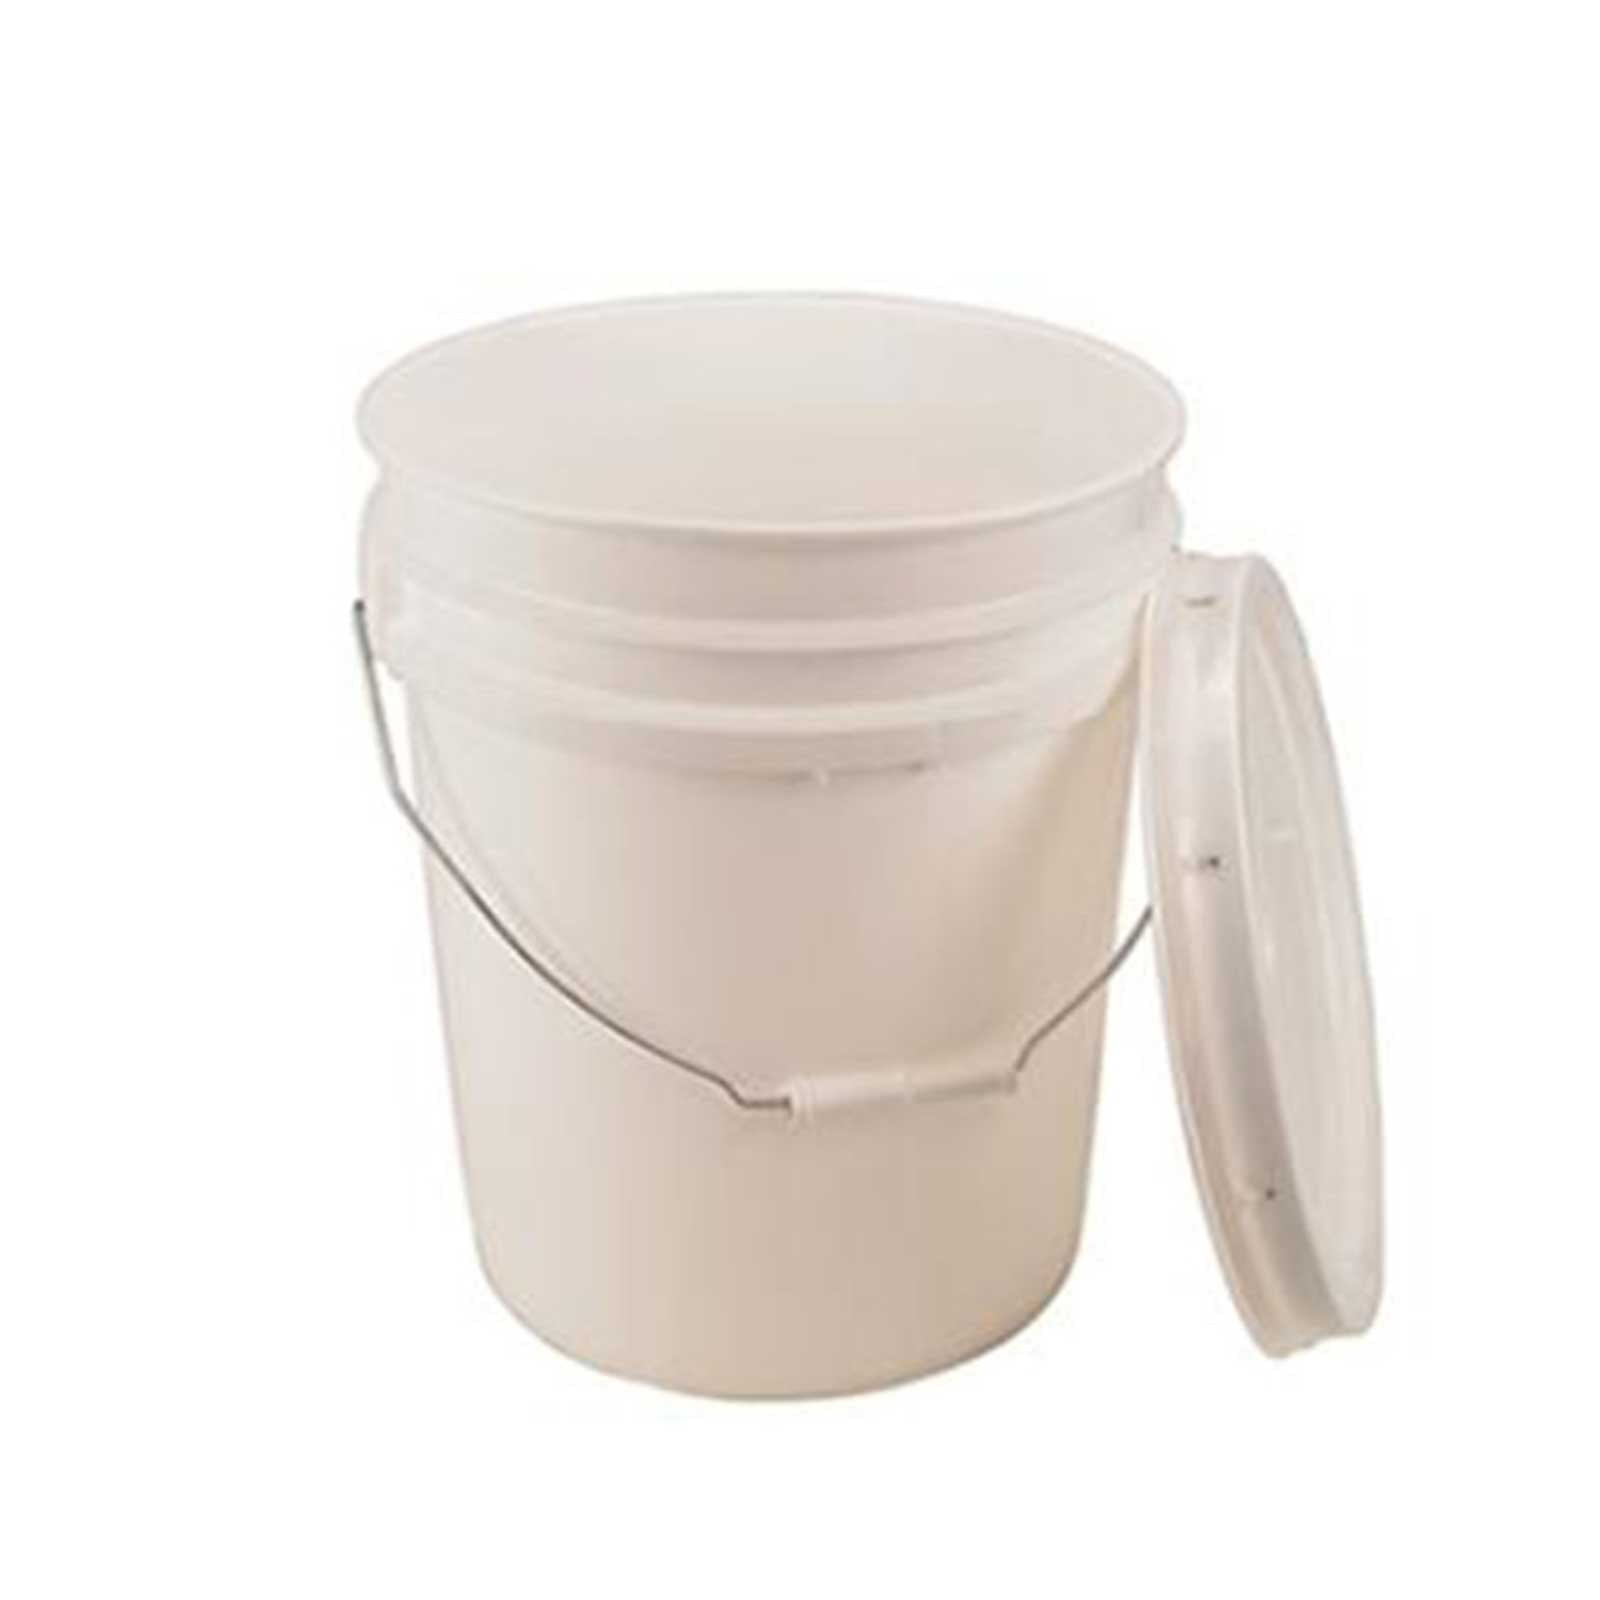 Bucket Dolly for 5, 6 and 15 Gallon Pails